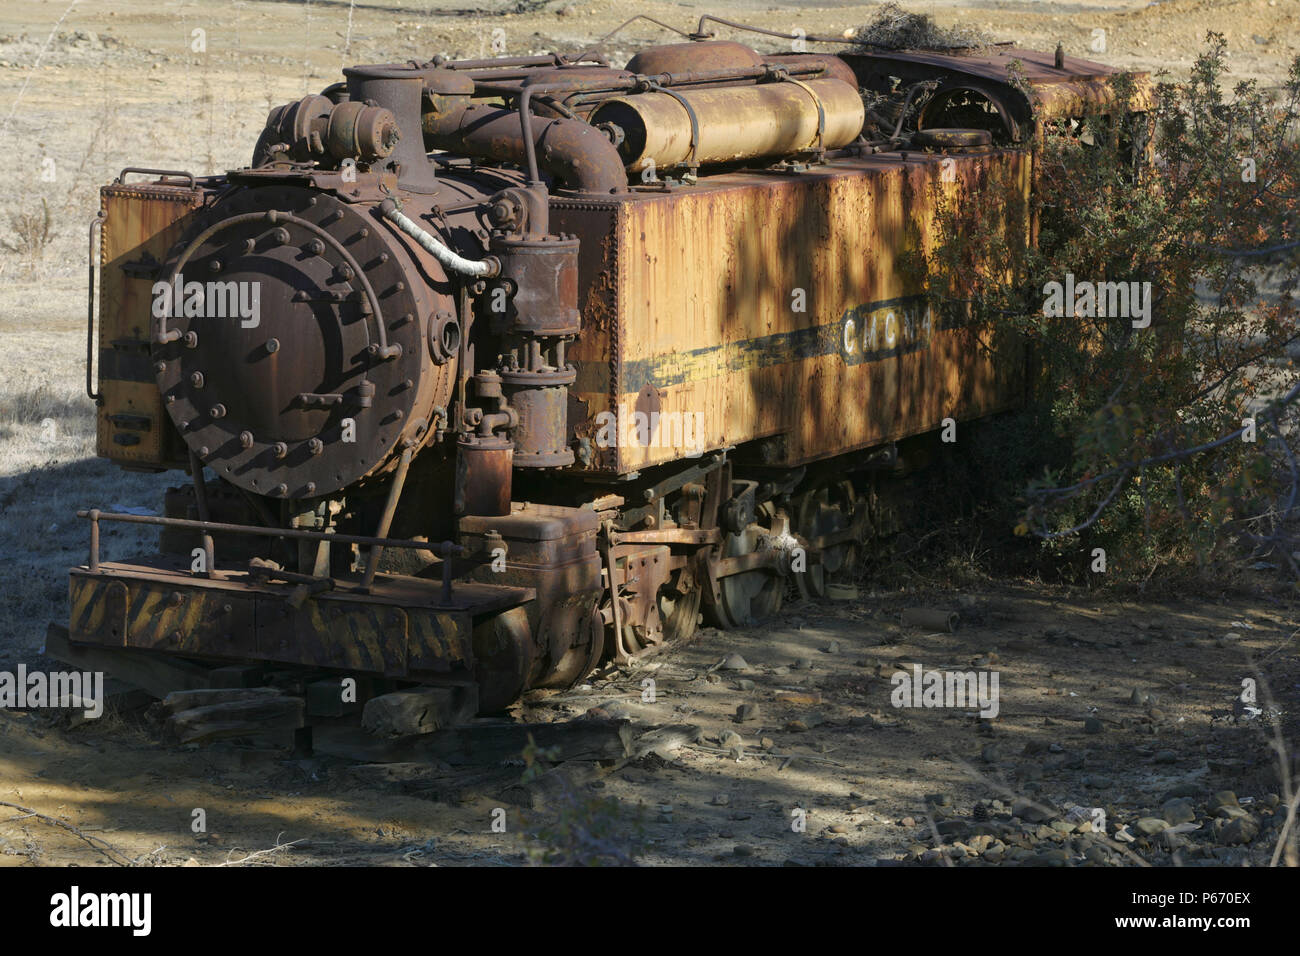 The former Cyprus Cyprus Mining Corporation's massive 0-8-2T, No.4, which has lain abandoned in the old workings for some 40 years. This superb engine Stock Photo